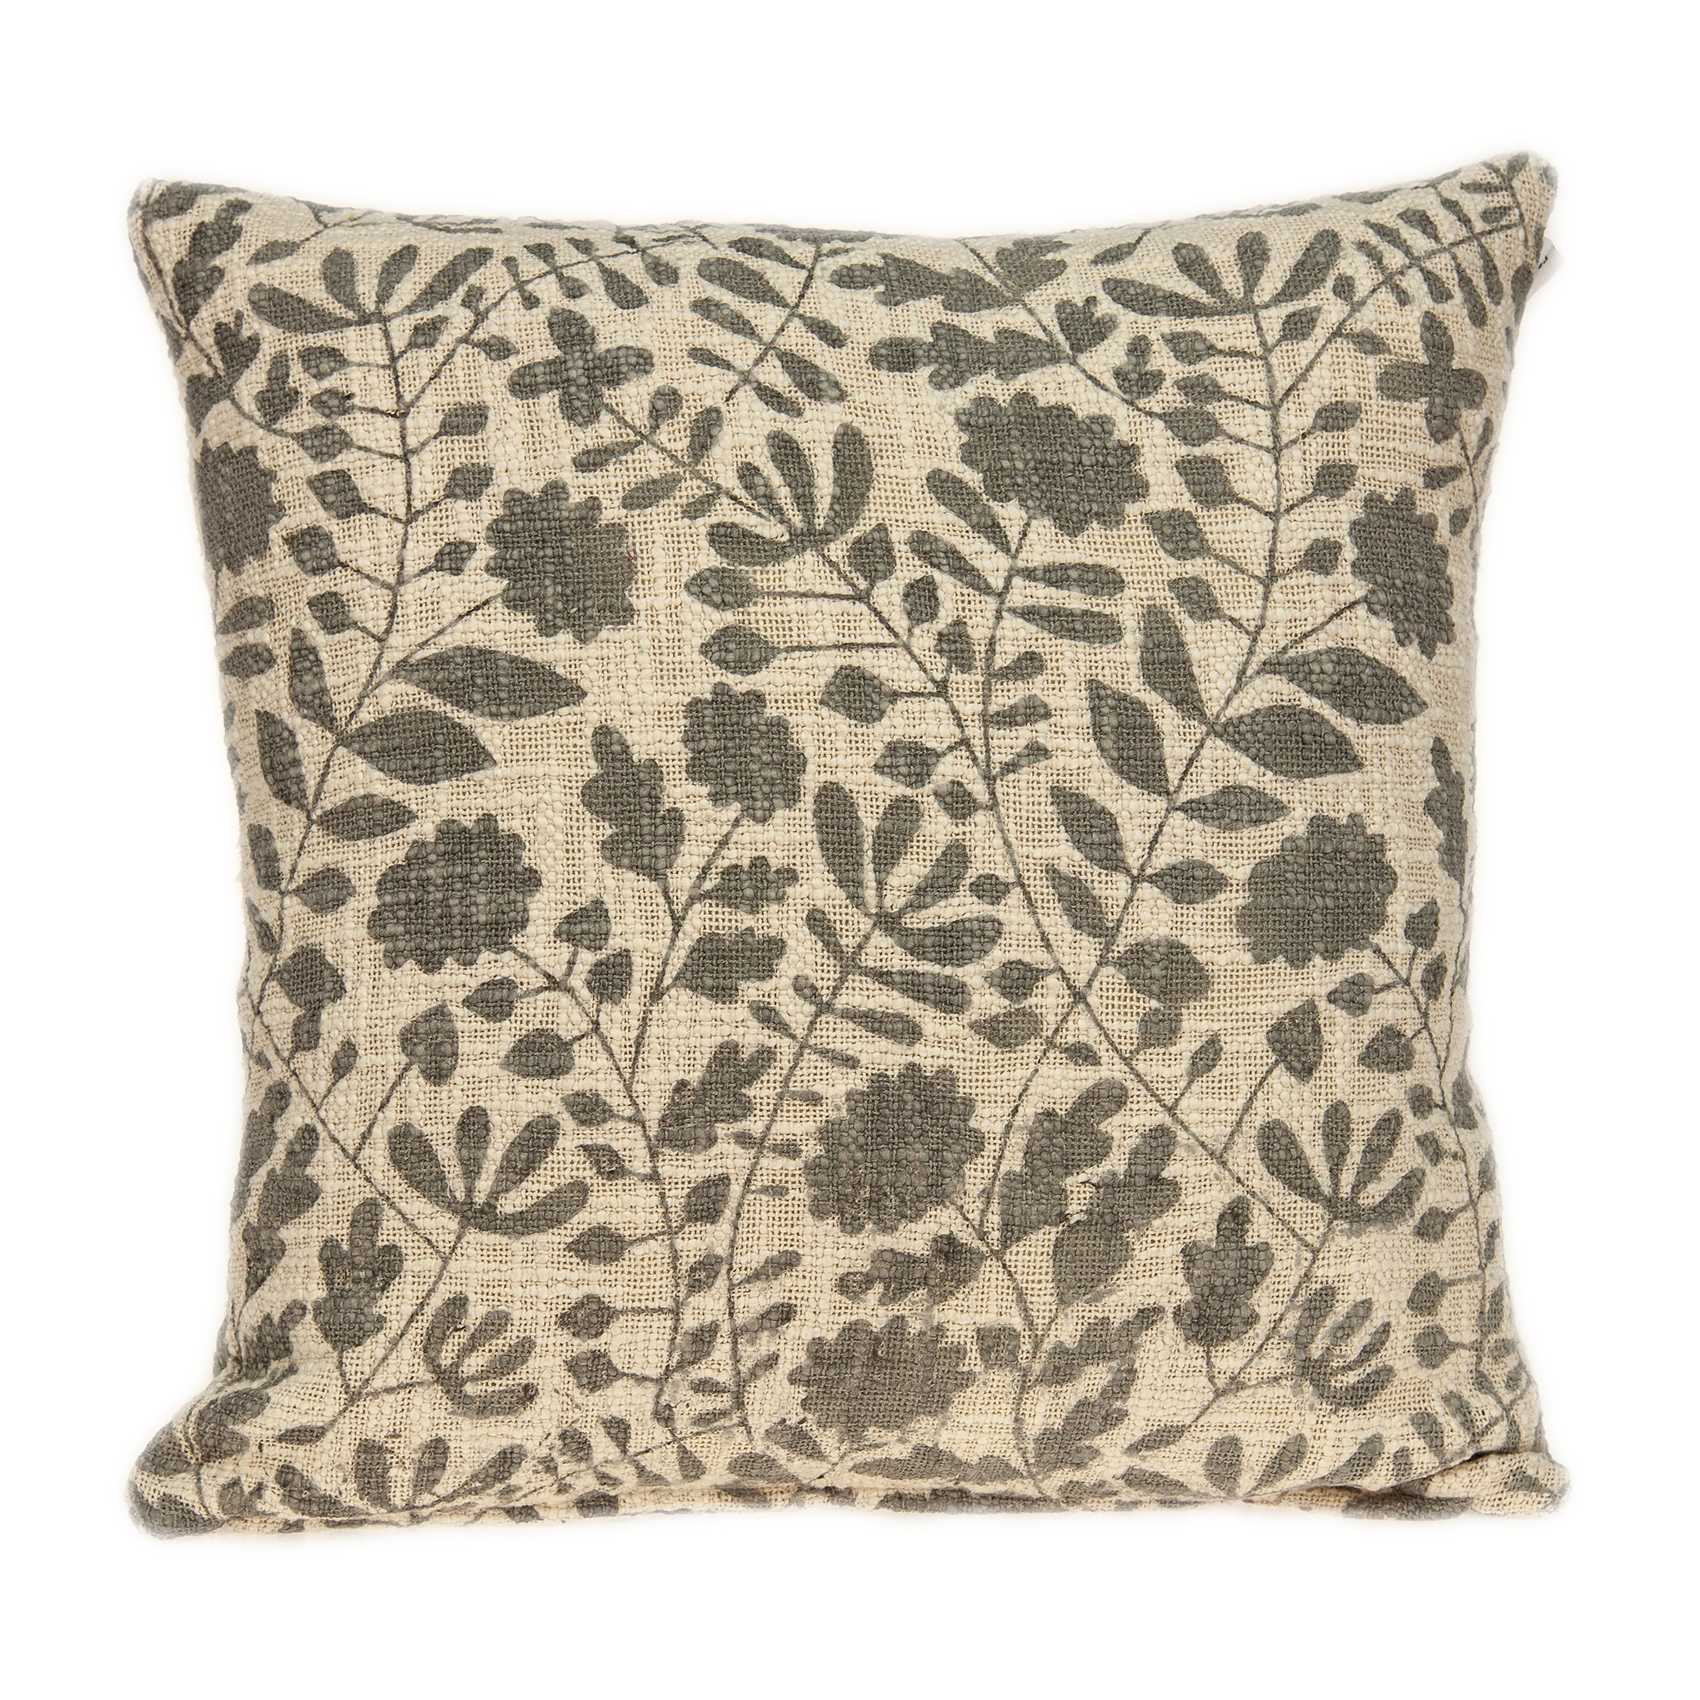 18" x 0.5" x 18" Transitional Beige Floral Print Pillow Cover